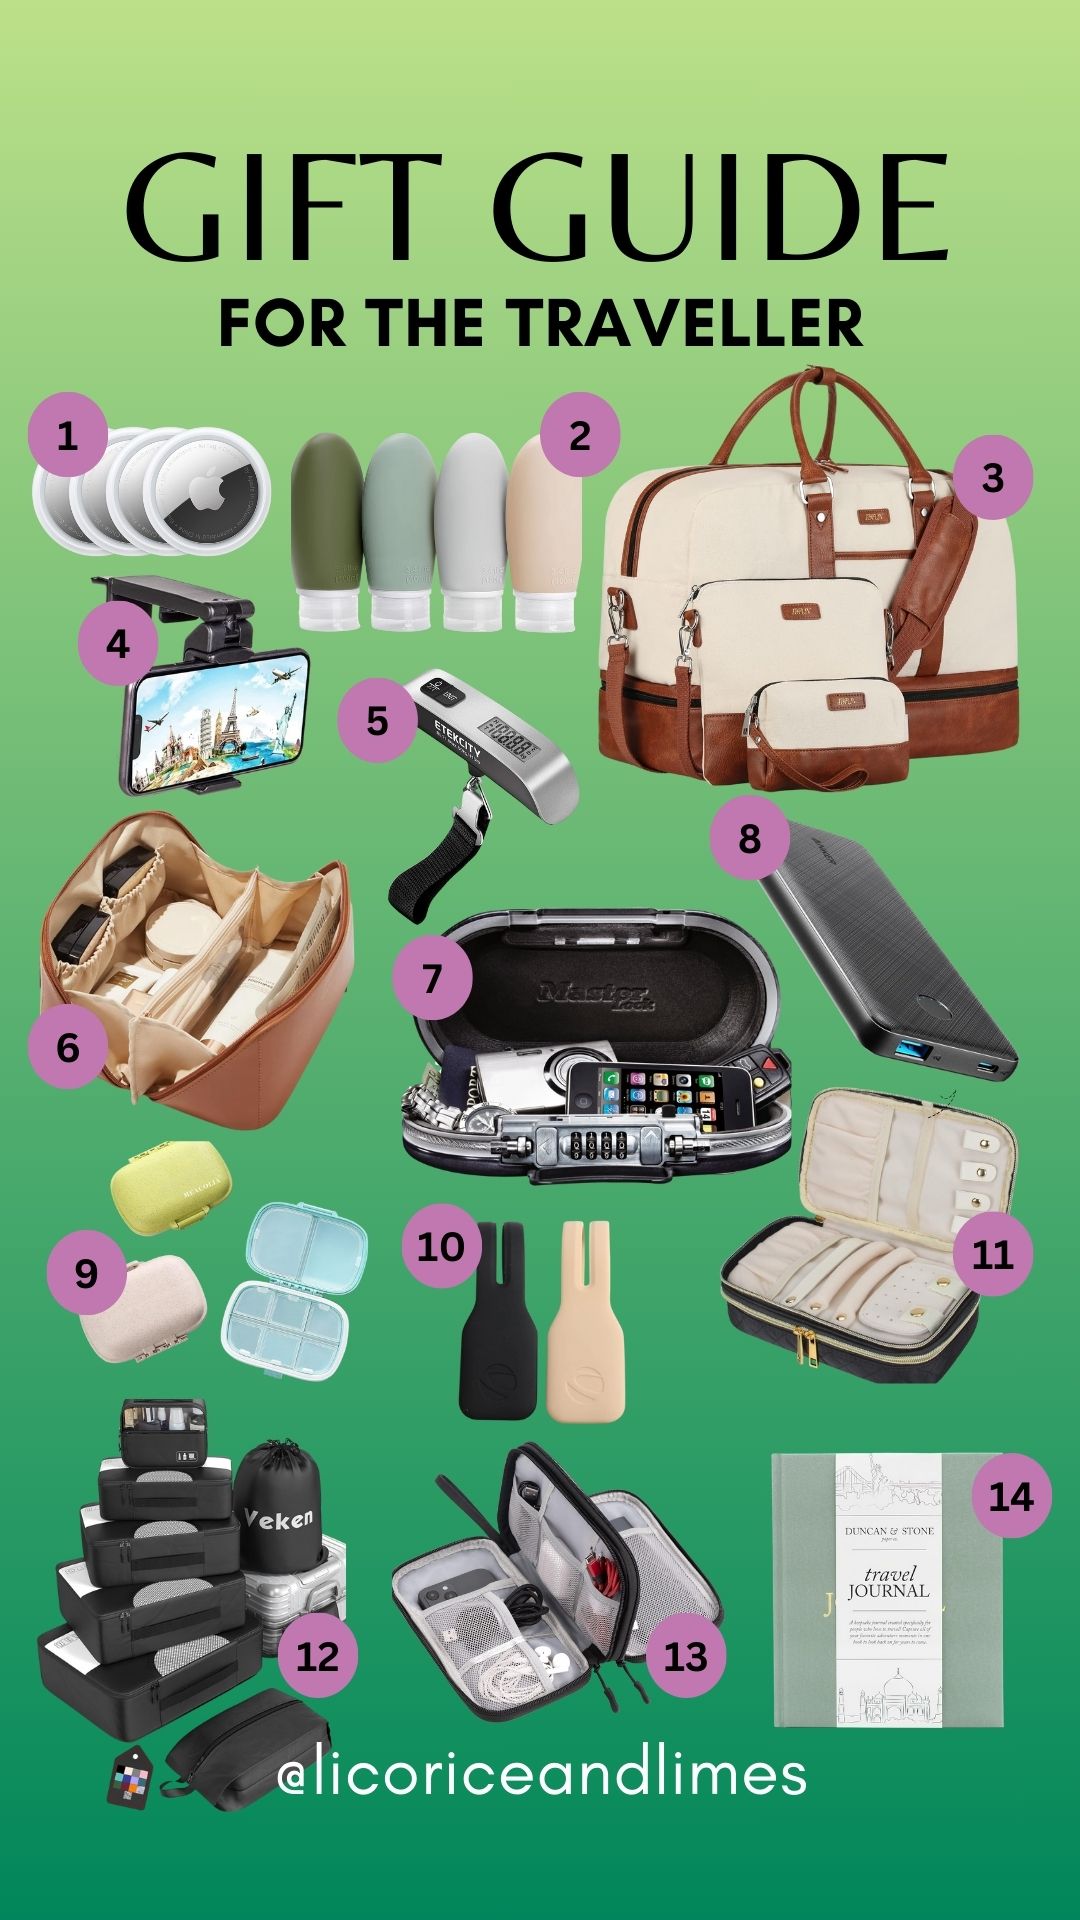 A holiday gift guide for the traveller